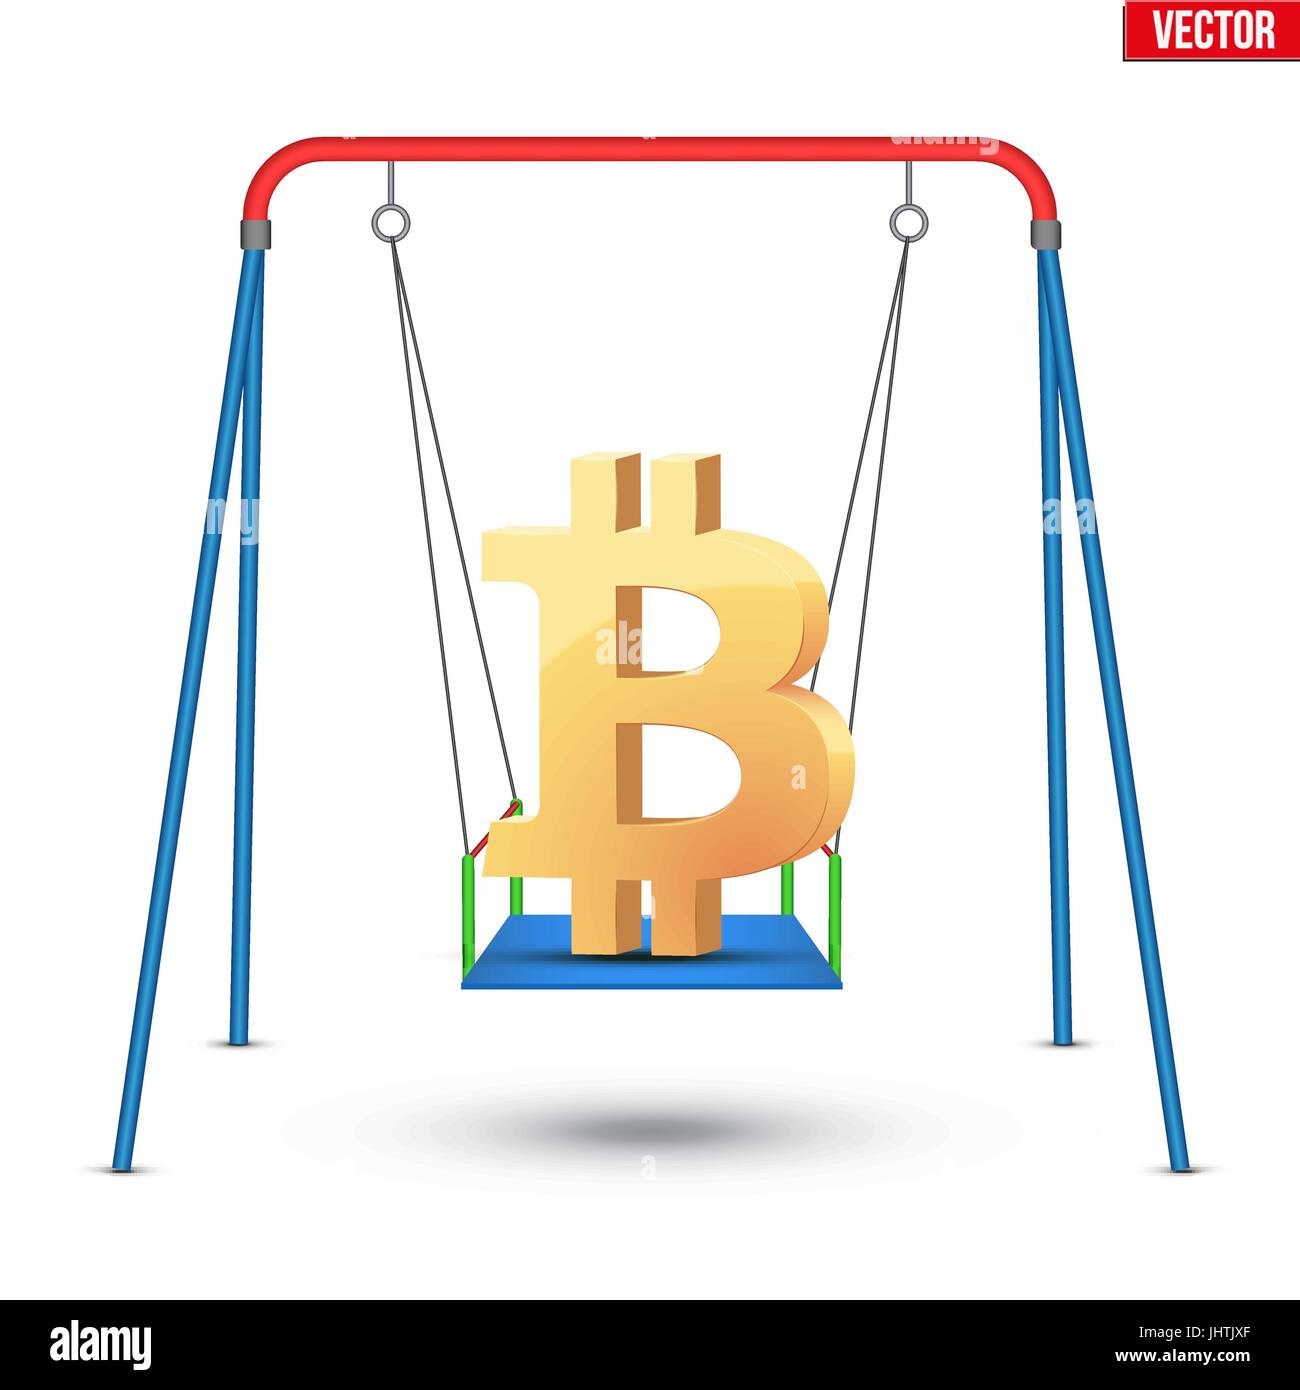 Concept illustration of bitcoin fluctuation Stock Vector